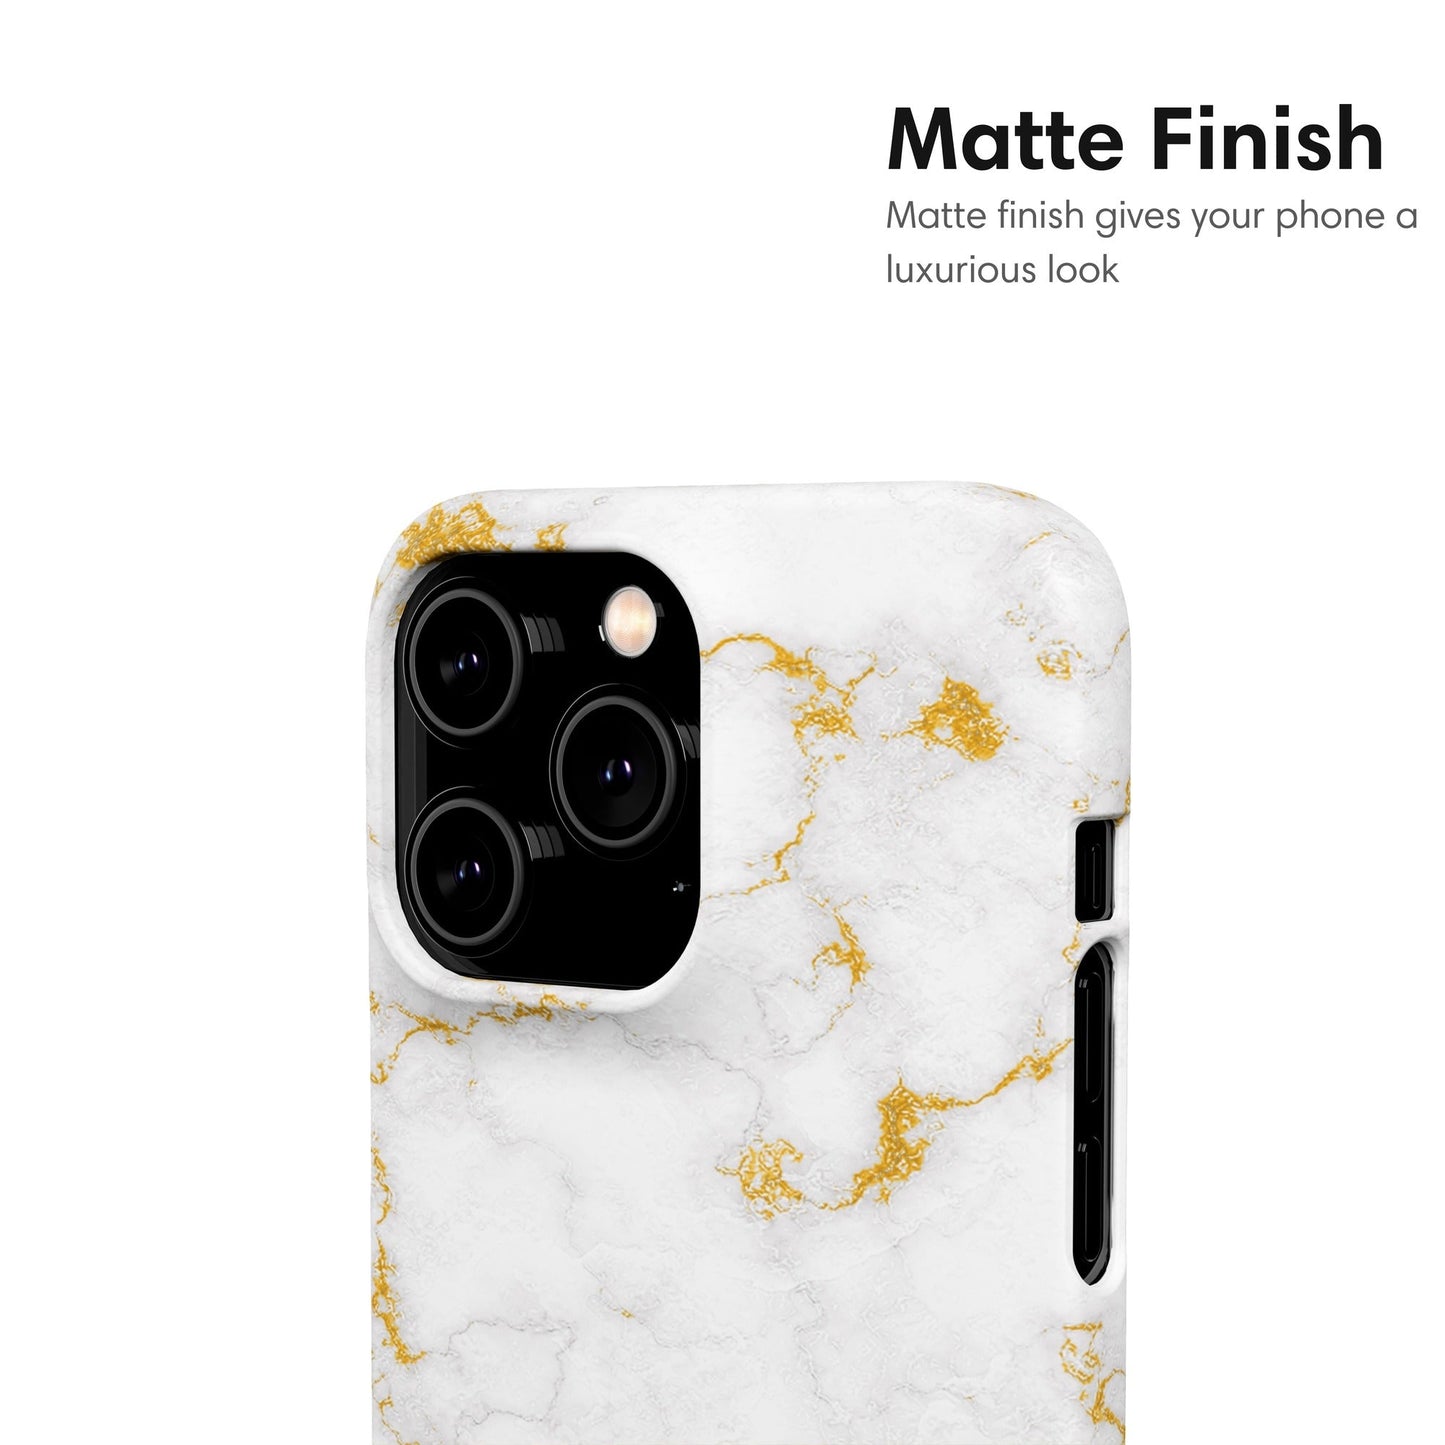 White and Gold Marble Snap Case - Classy Cases - Phone Case - iPhone 12 Pro Max - Glossy - 